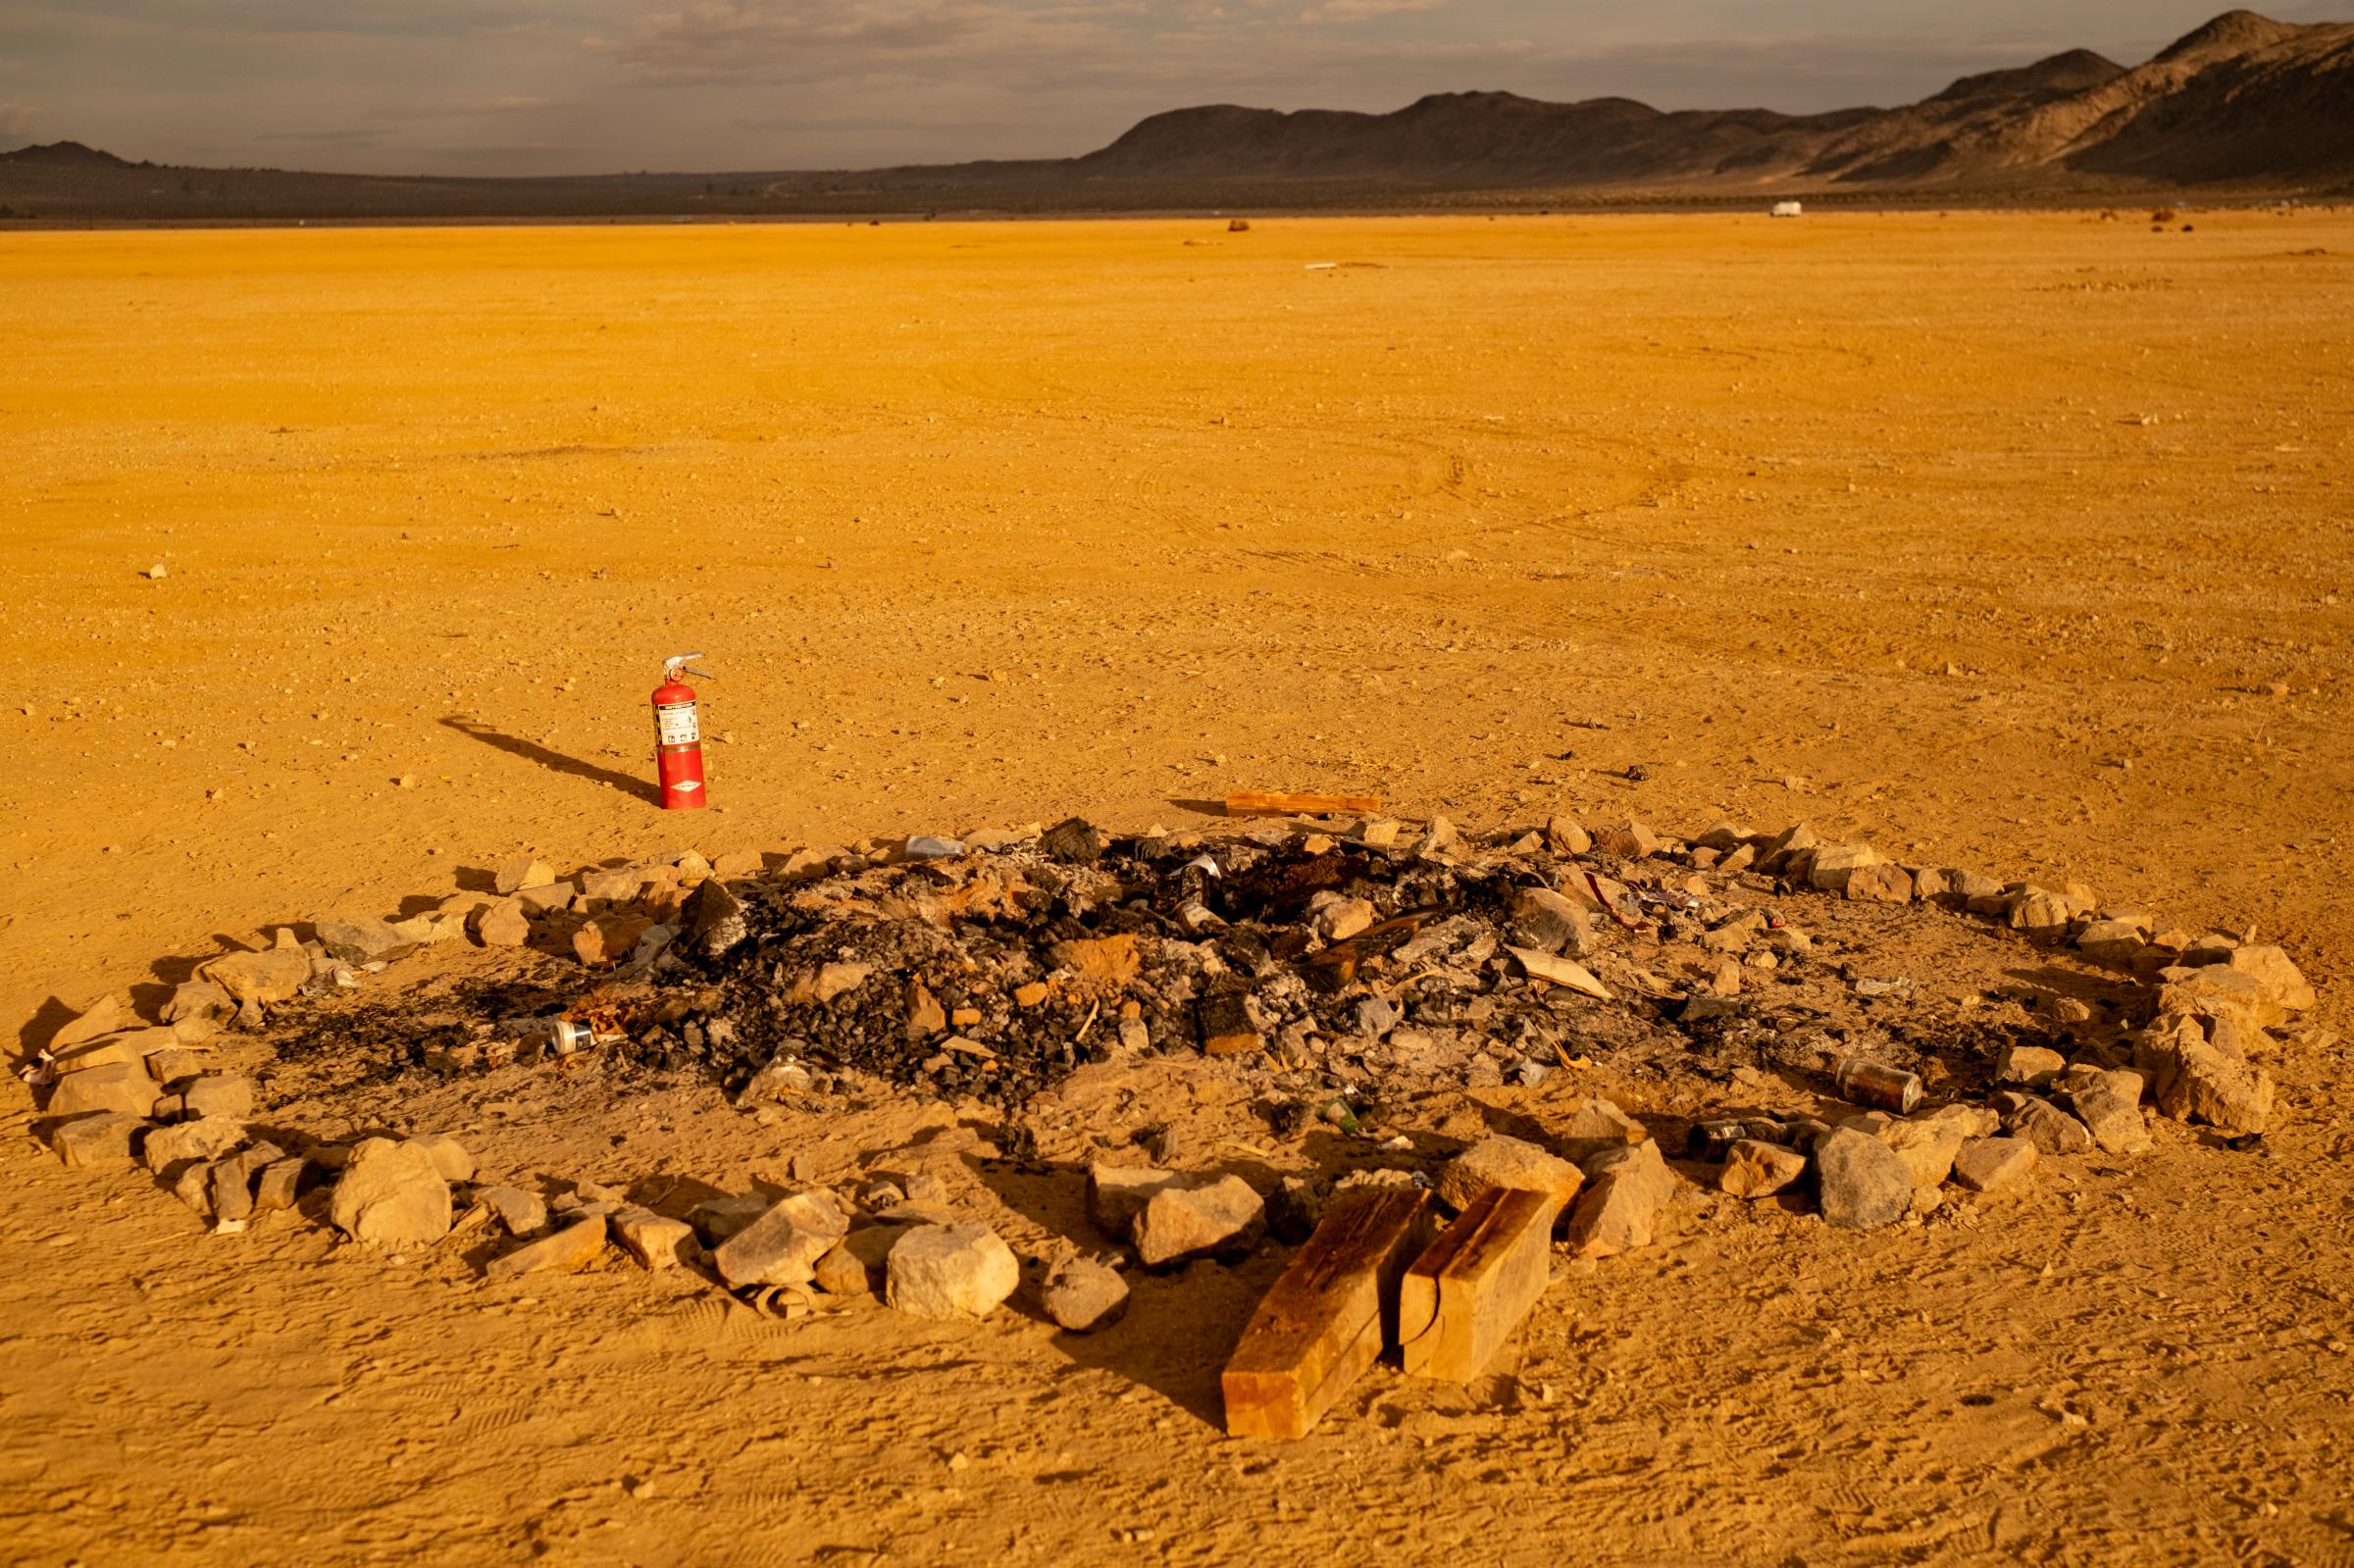 A Warm Winter (An Ongoing Journey) - A fire extinguisher left behind at the Sunfair Dry Lake...